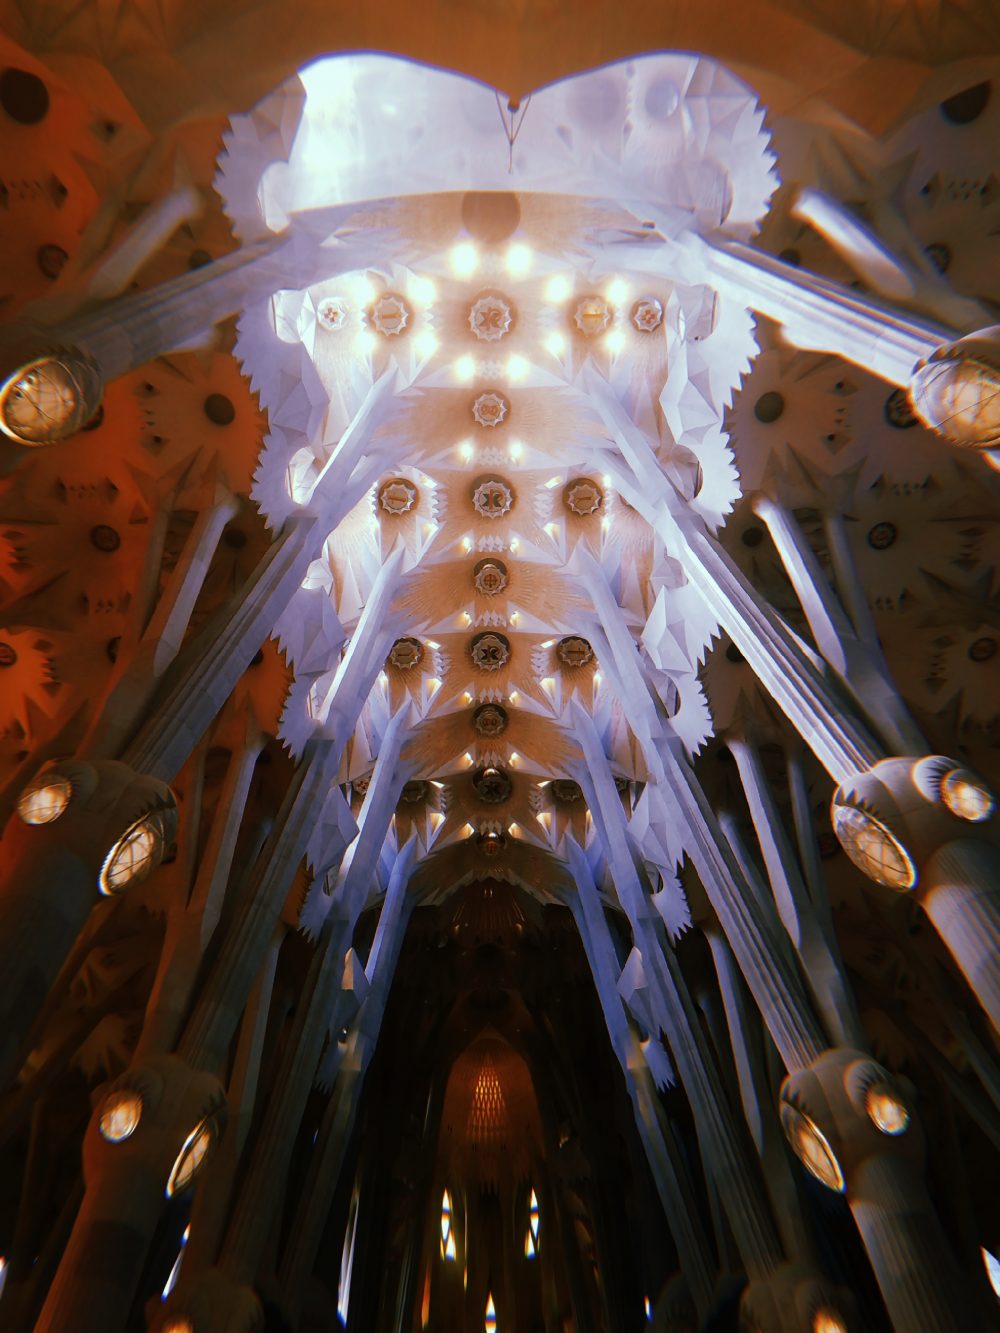 Inside of La Segrada Familia cathedral in Barcelona, Spain. The photo is taken inside the cathedral looking up at the roof. The room is largely dark on the sides but light shines through the roof.